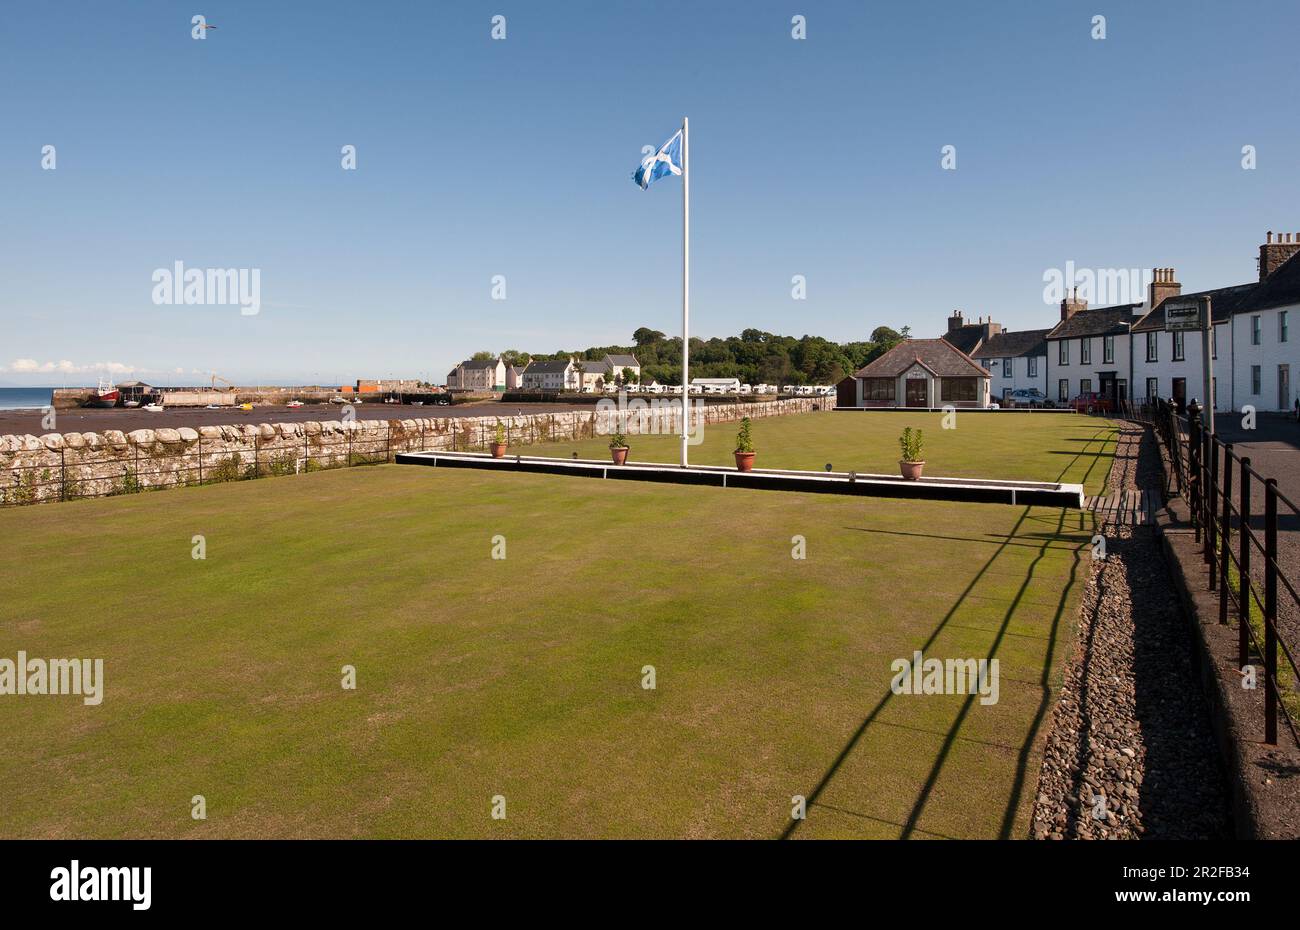 A St Andrews flag flies on Garlieston lawn bowling green beside the sea in Dumfries and Galloway Scotland Stock Photo